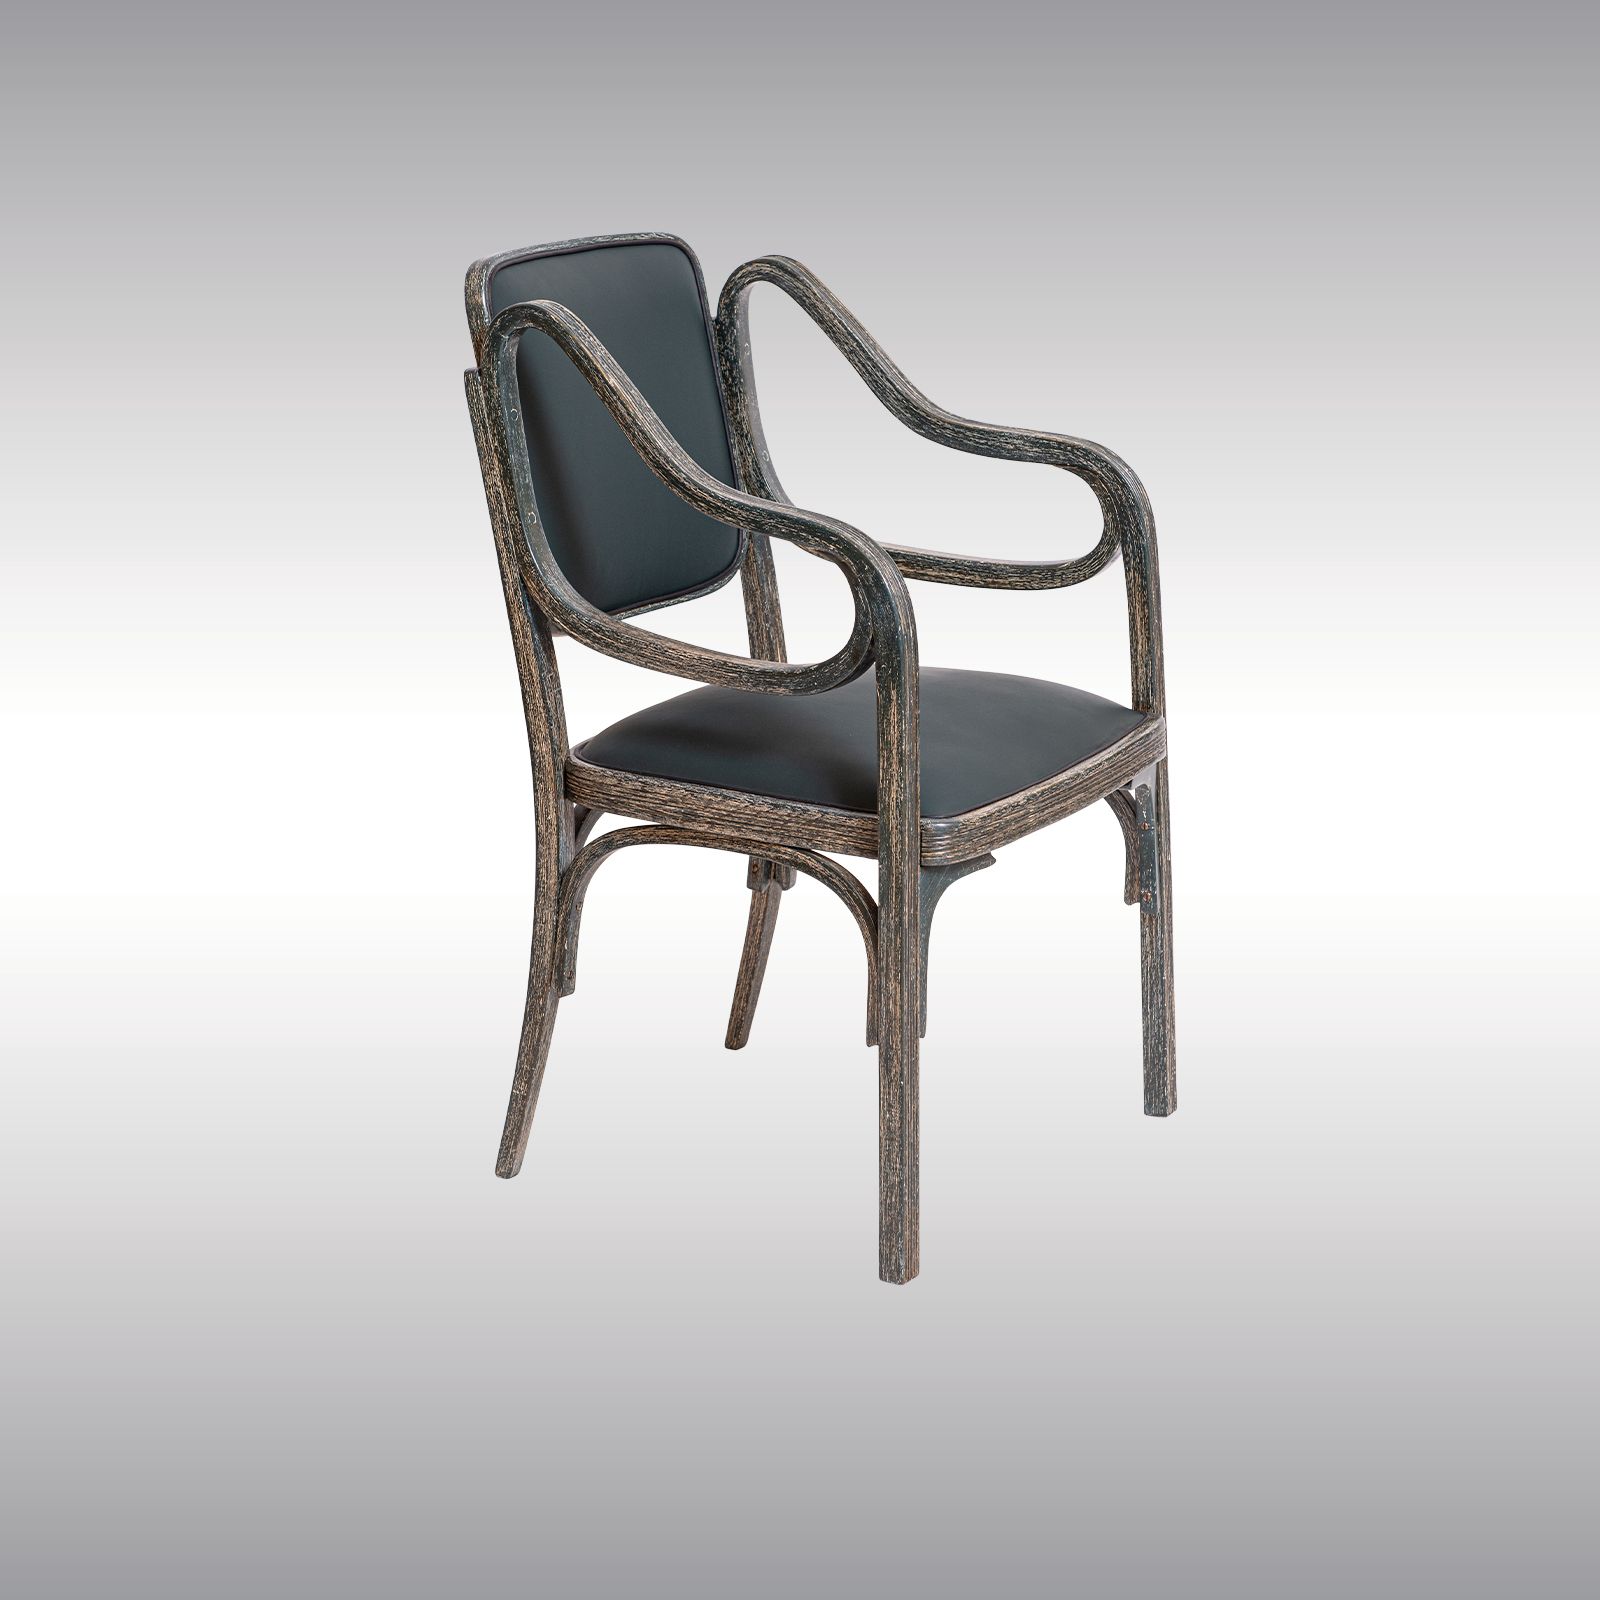 WOKA LAMPS VIENNA - OrderNr.: 70072|Otto Wagner Armchair 1901 - Design: Otto Wagner